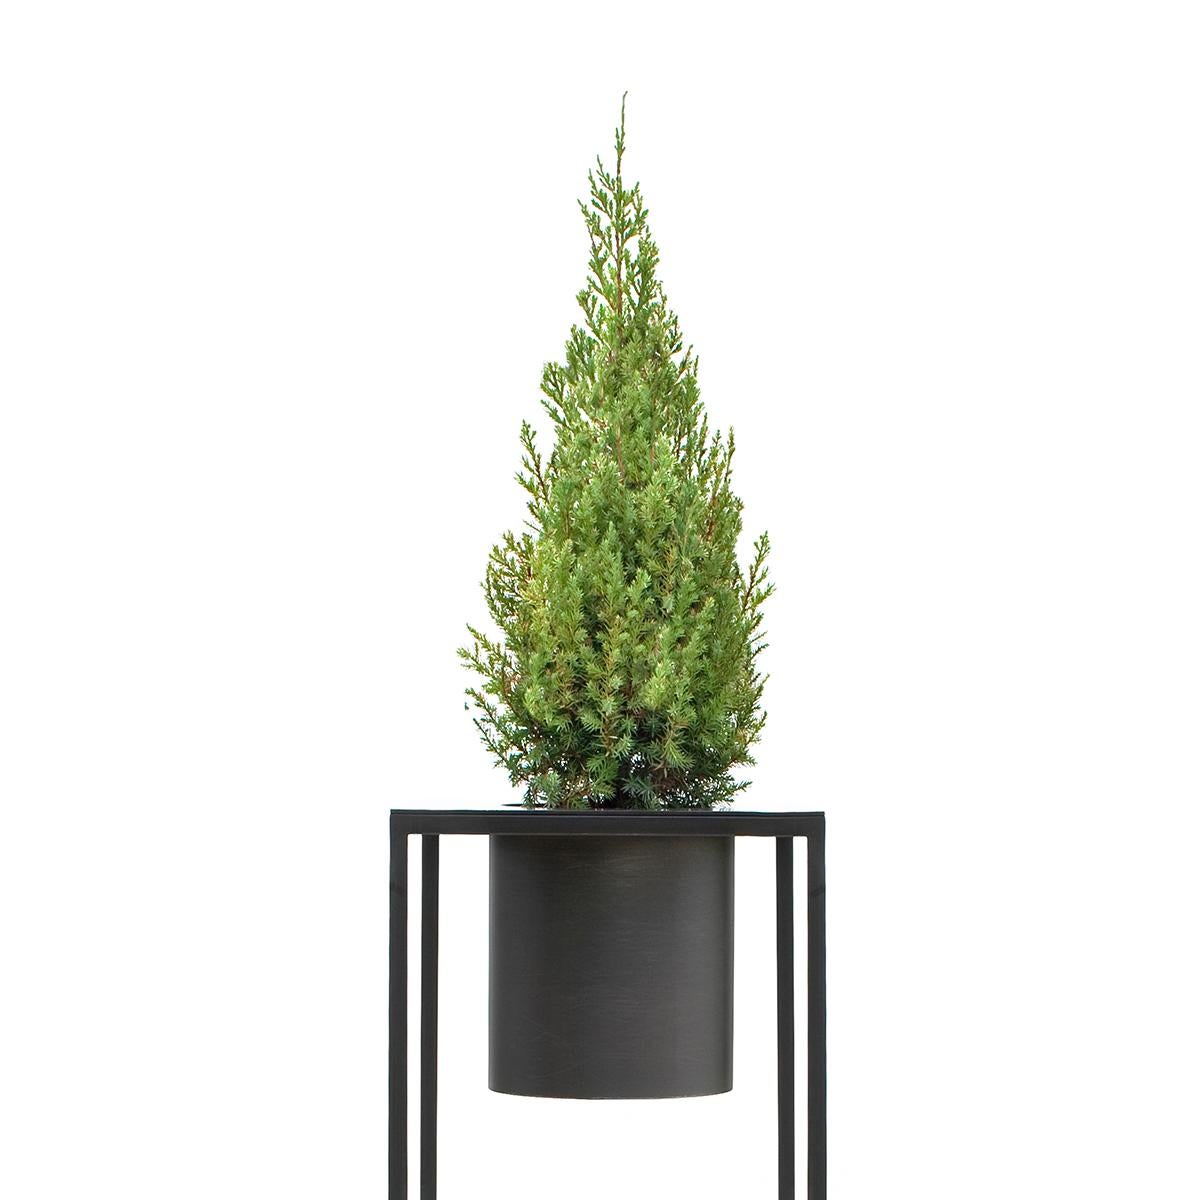 Riviera 1 plant h90cm is a vase in burnished iron designed by Aldo Cibic and made by DeCastelli,
market leader in metalwork design for furniture made in Italy.
After thinking about green on a large scale, Aldo Cibic approaches the aesthetic of